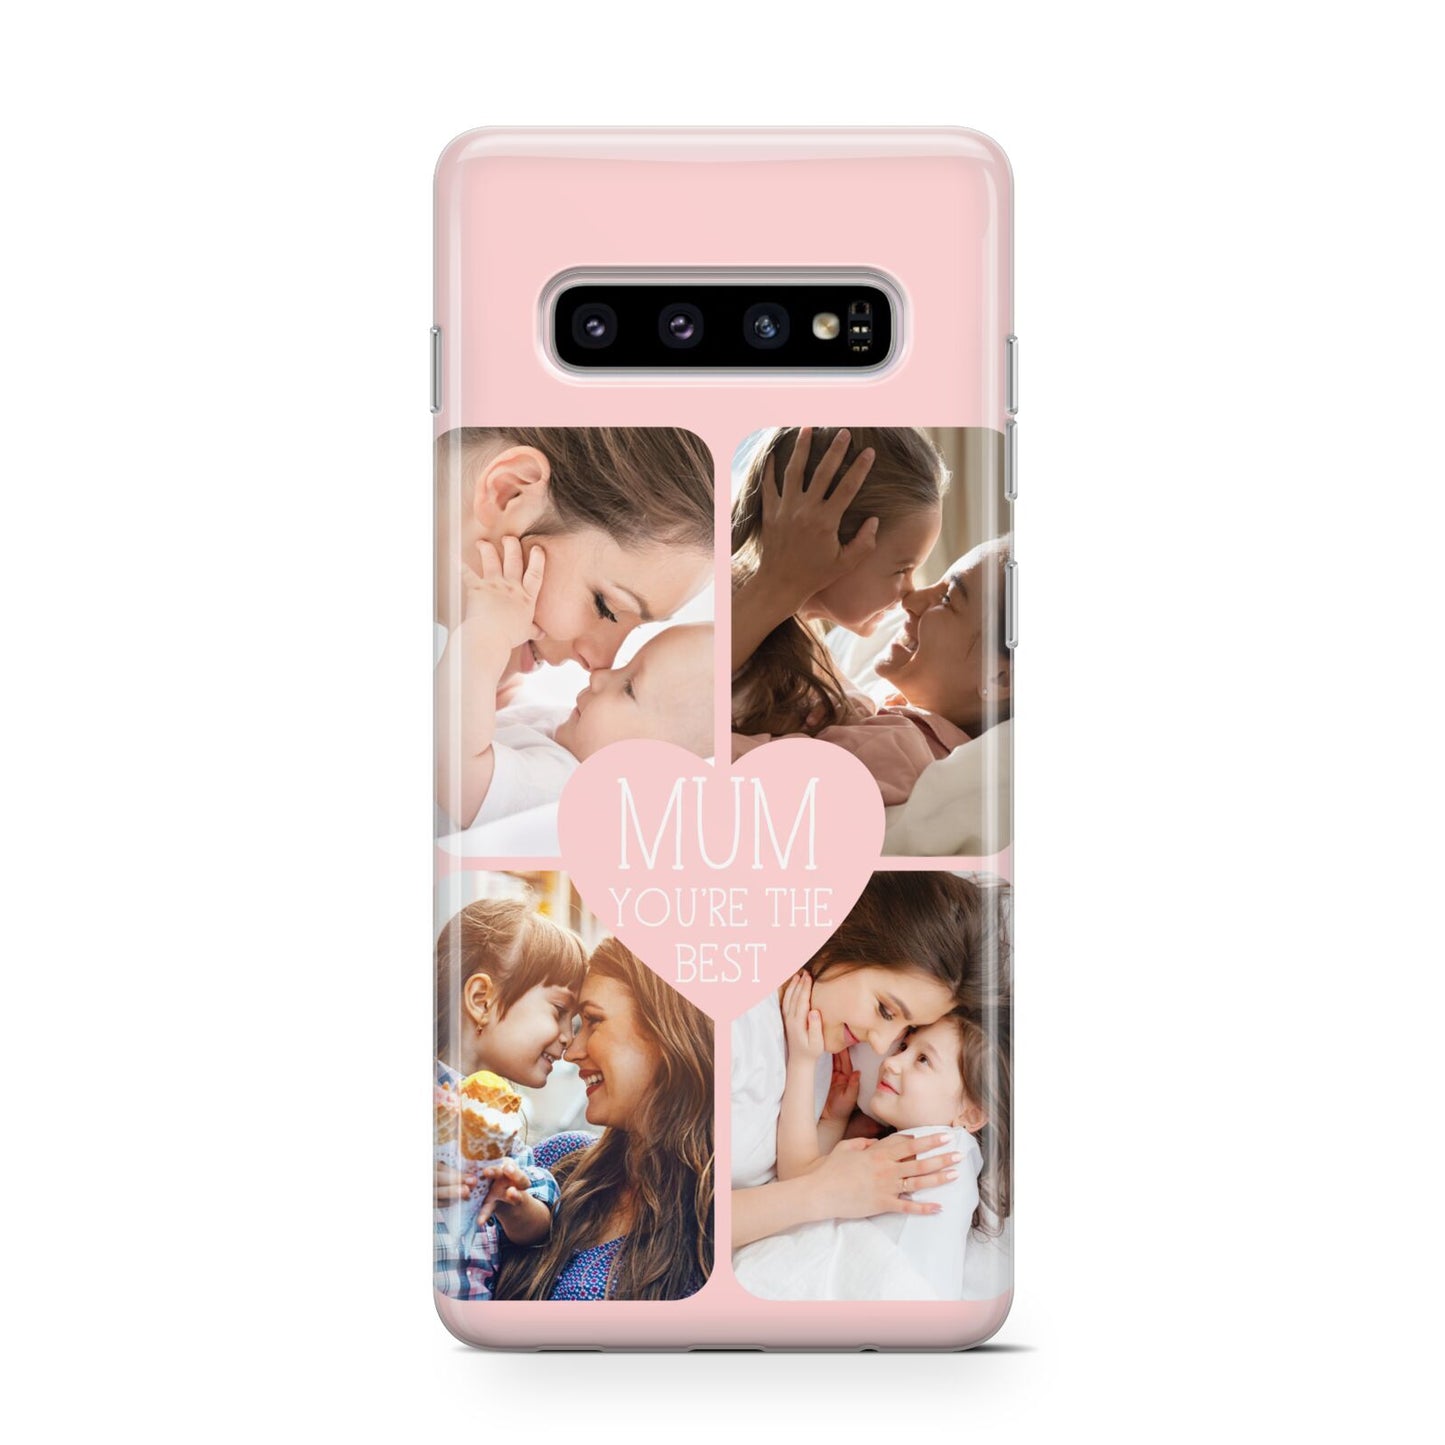 Mothers Day Four Photo Upload Samsung Galaxy S10 Case